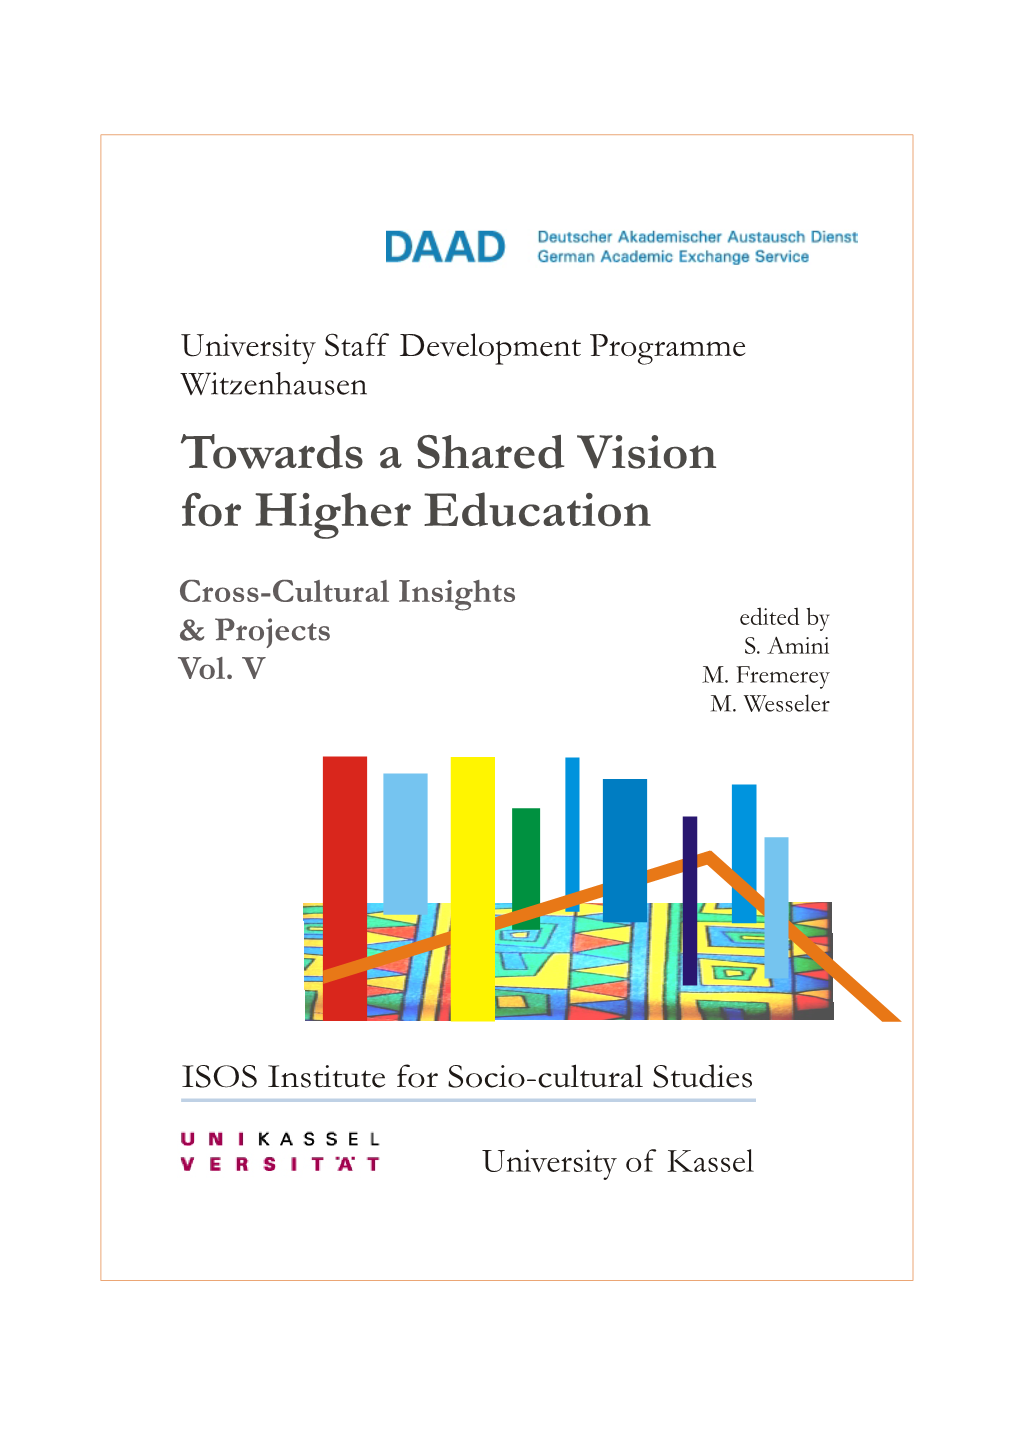 Towards a Shared Vision for Higher Education